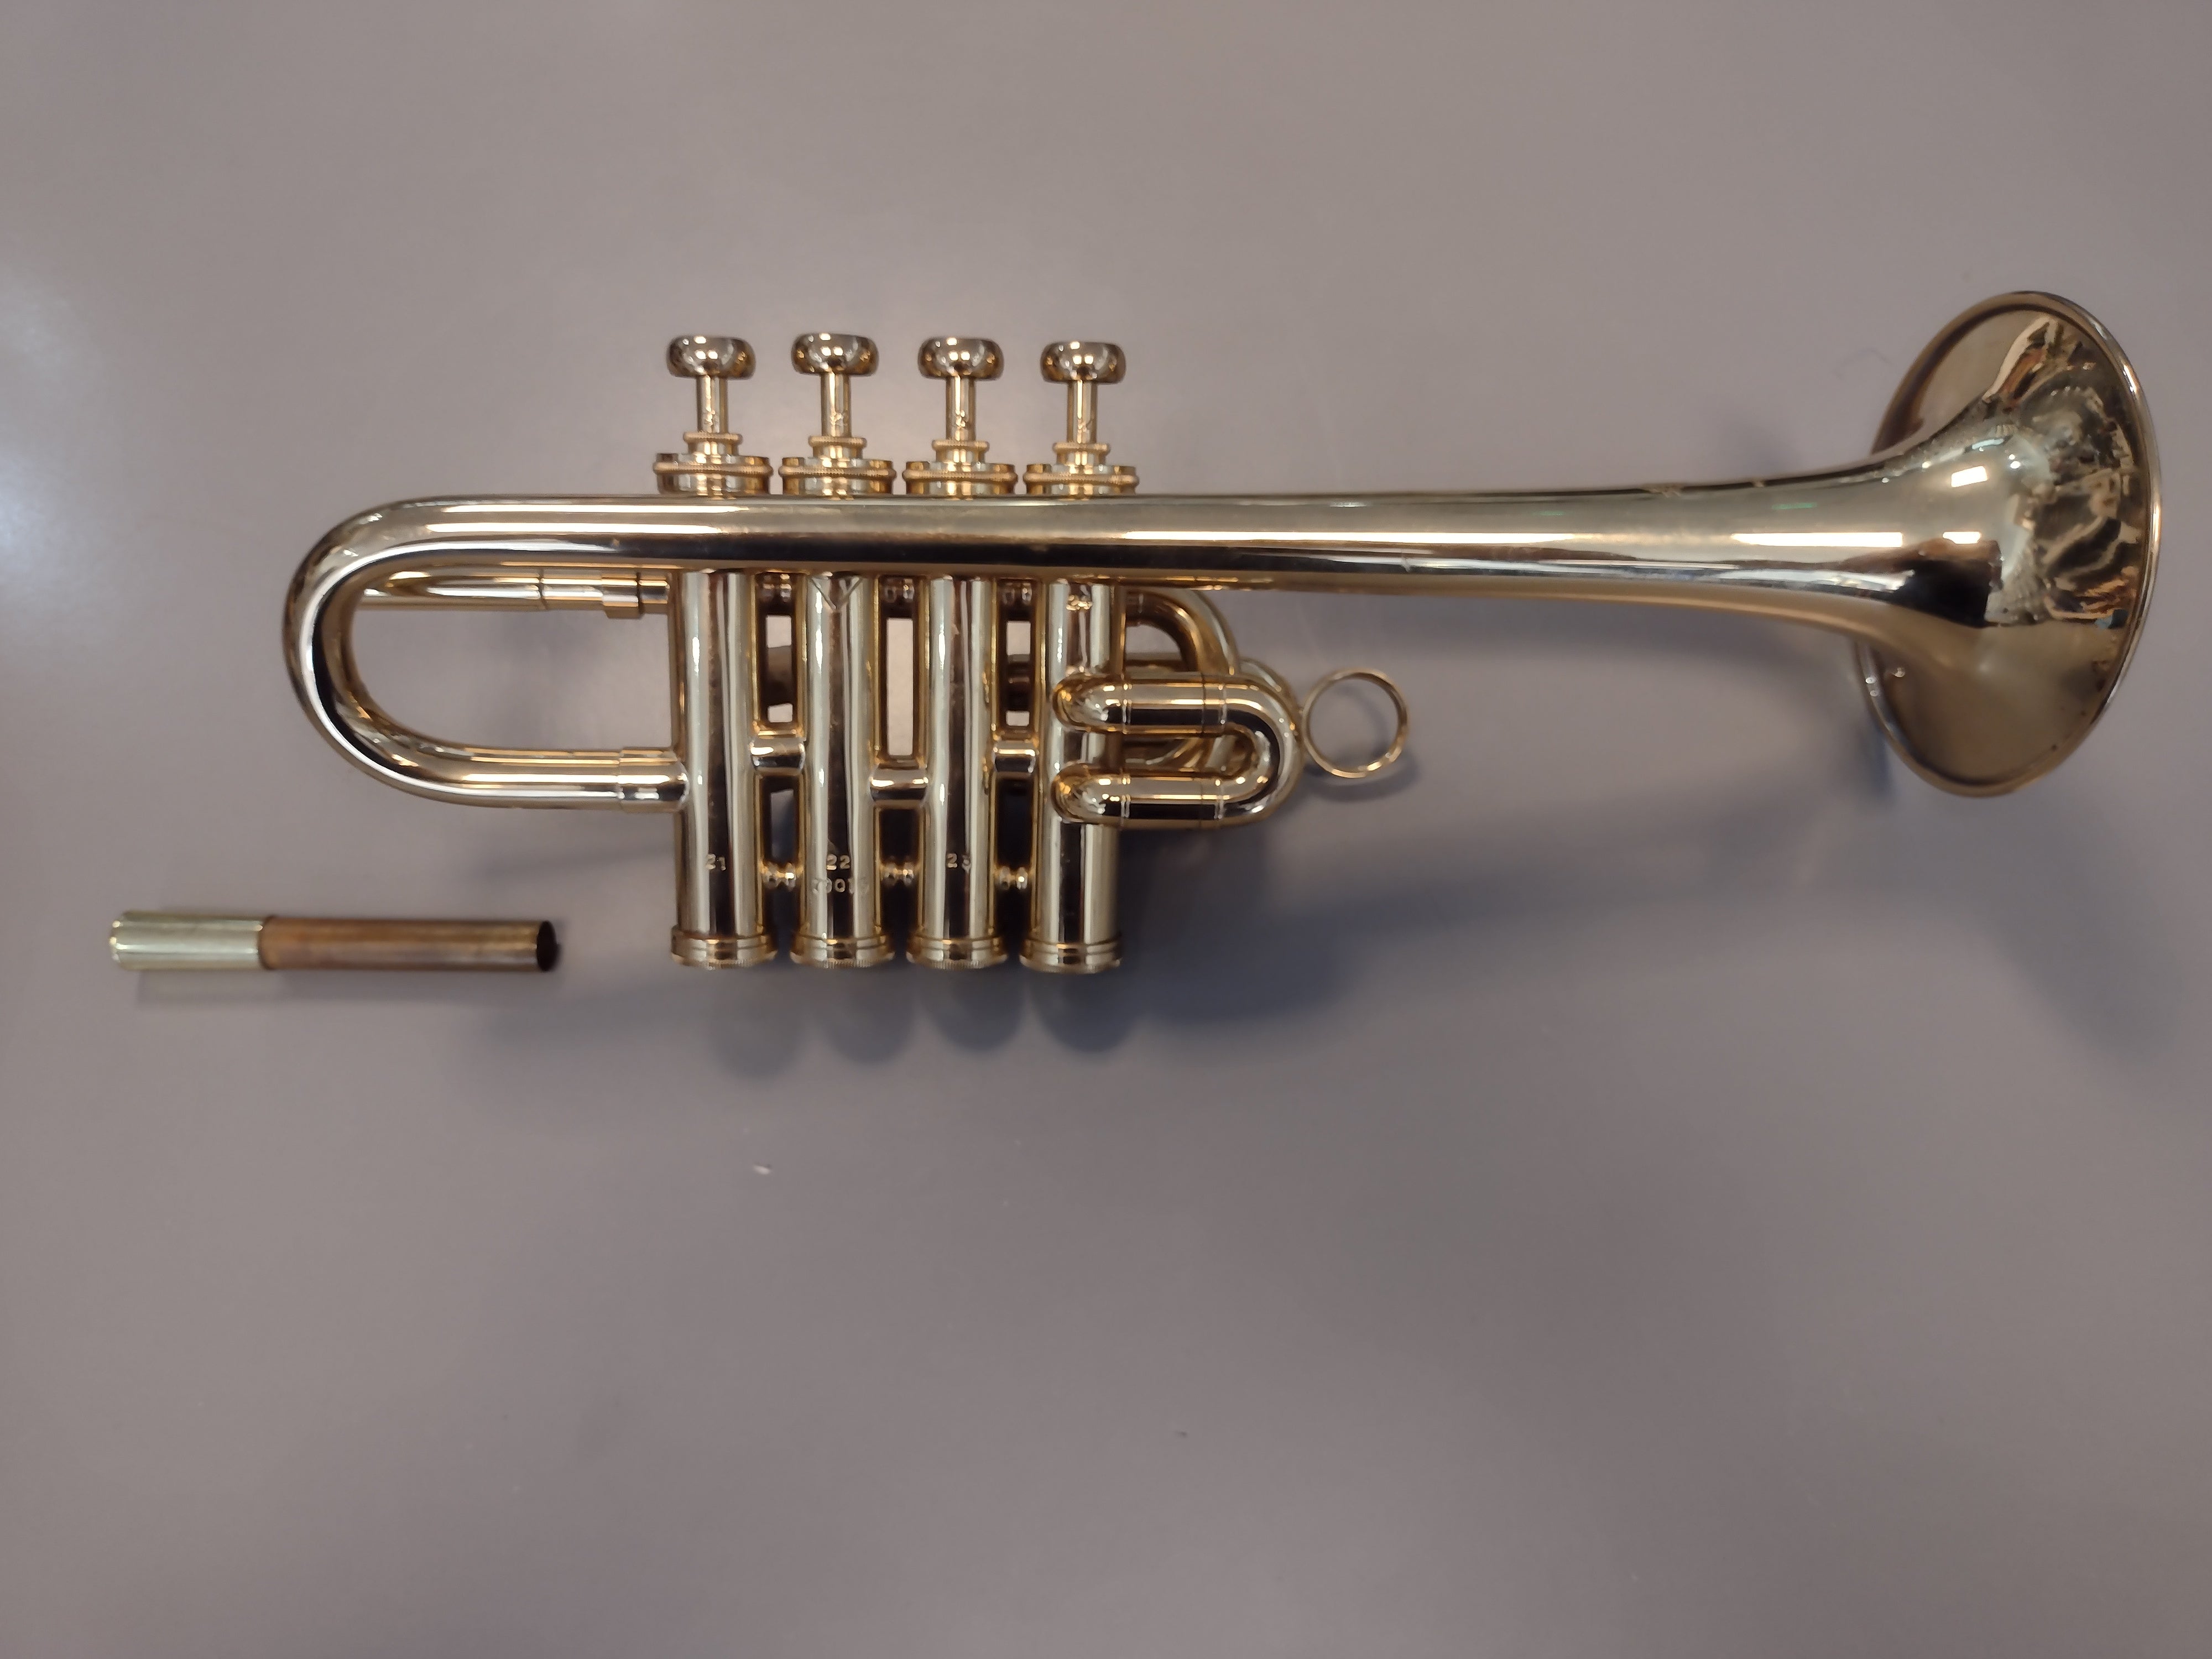 Selmer G Piccolo Trumpet including 2 shanks (Pre-owned)